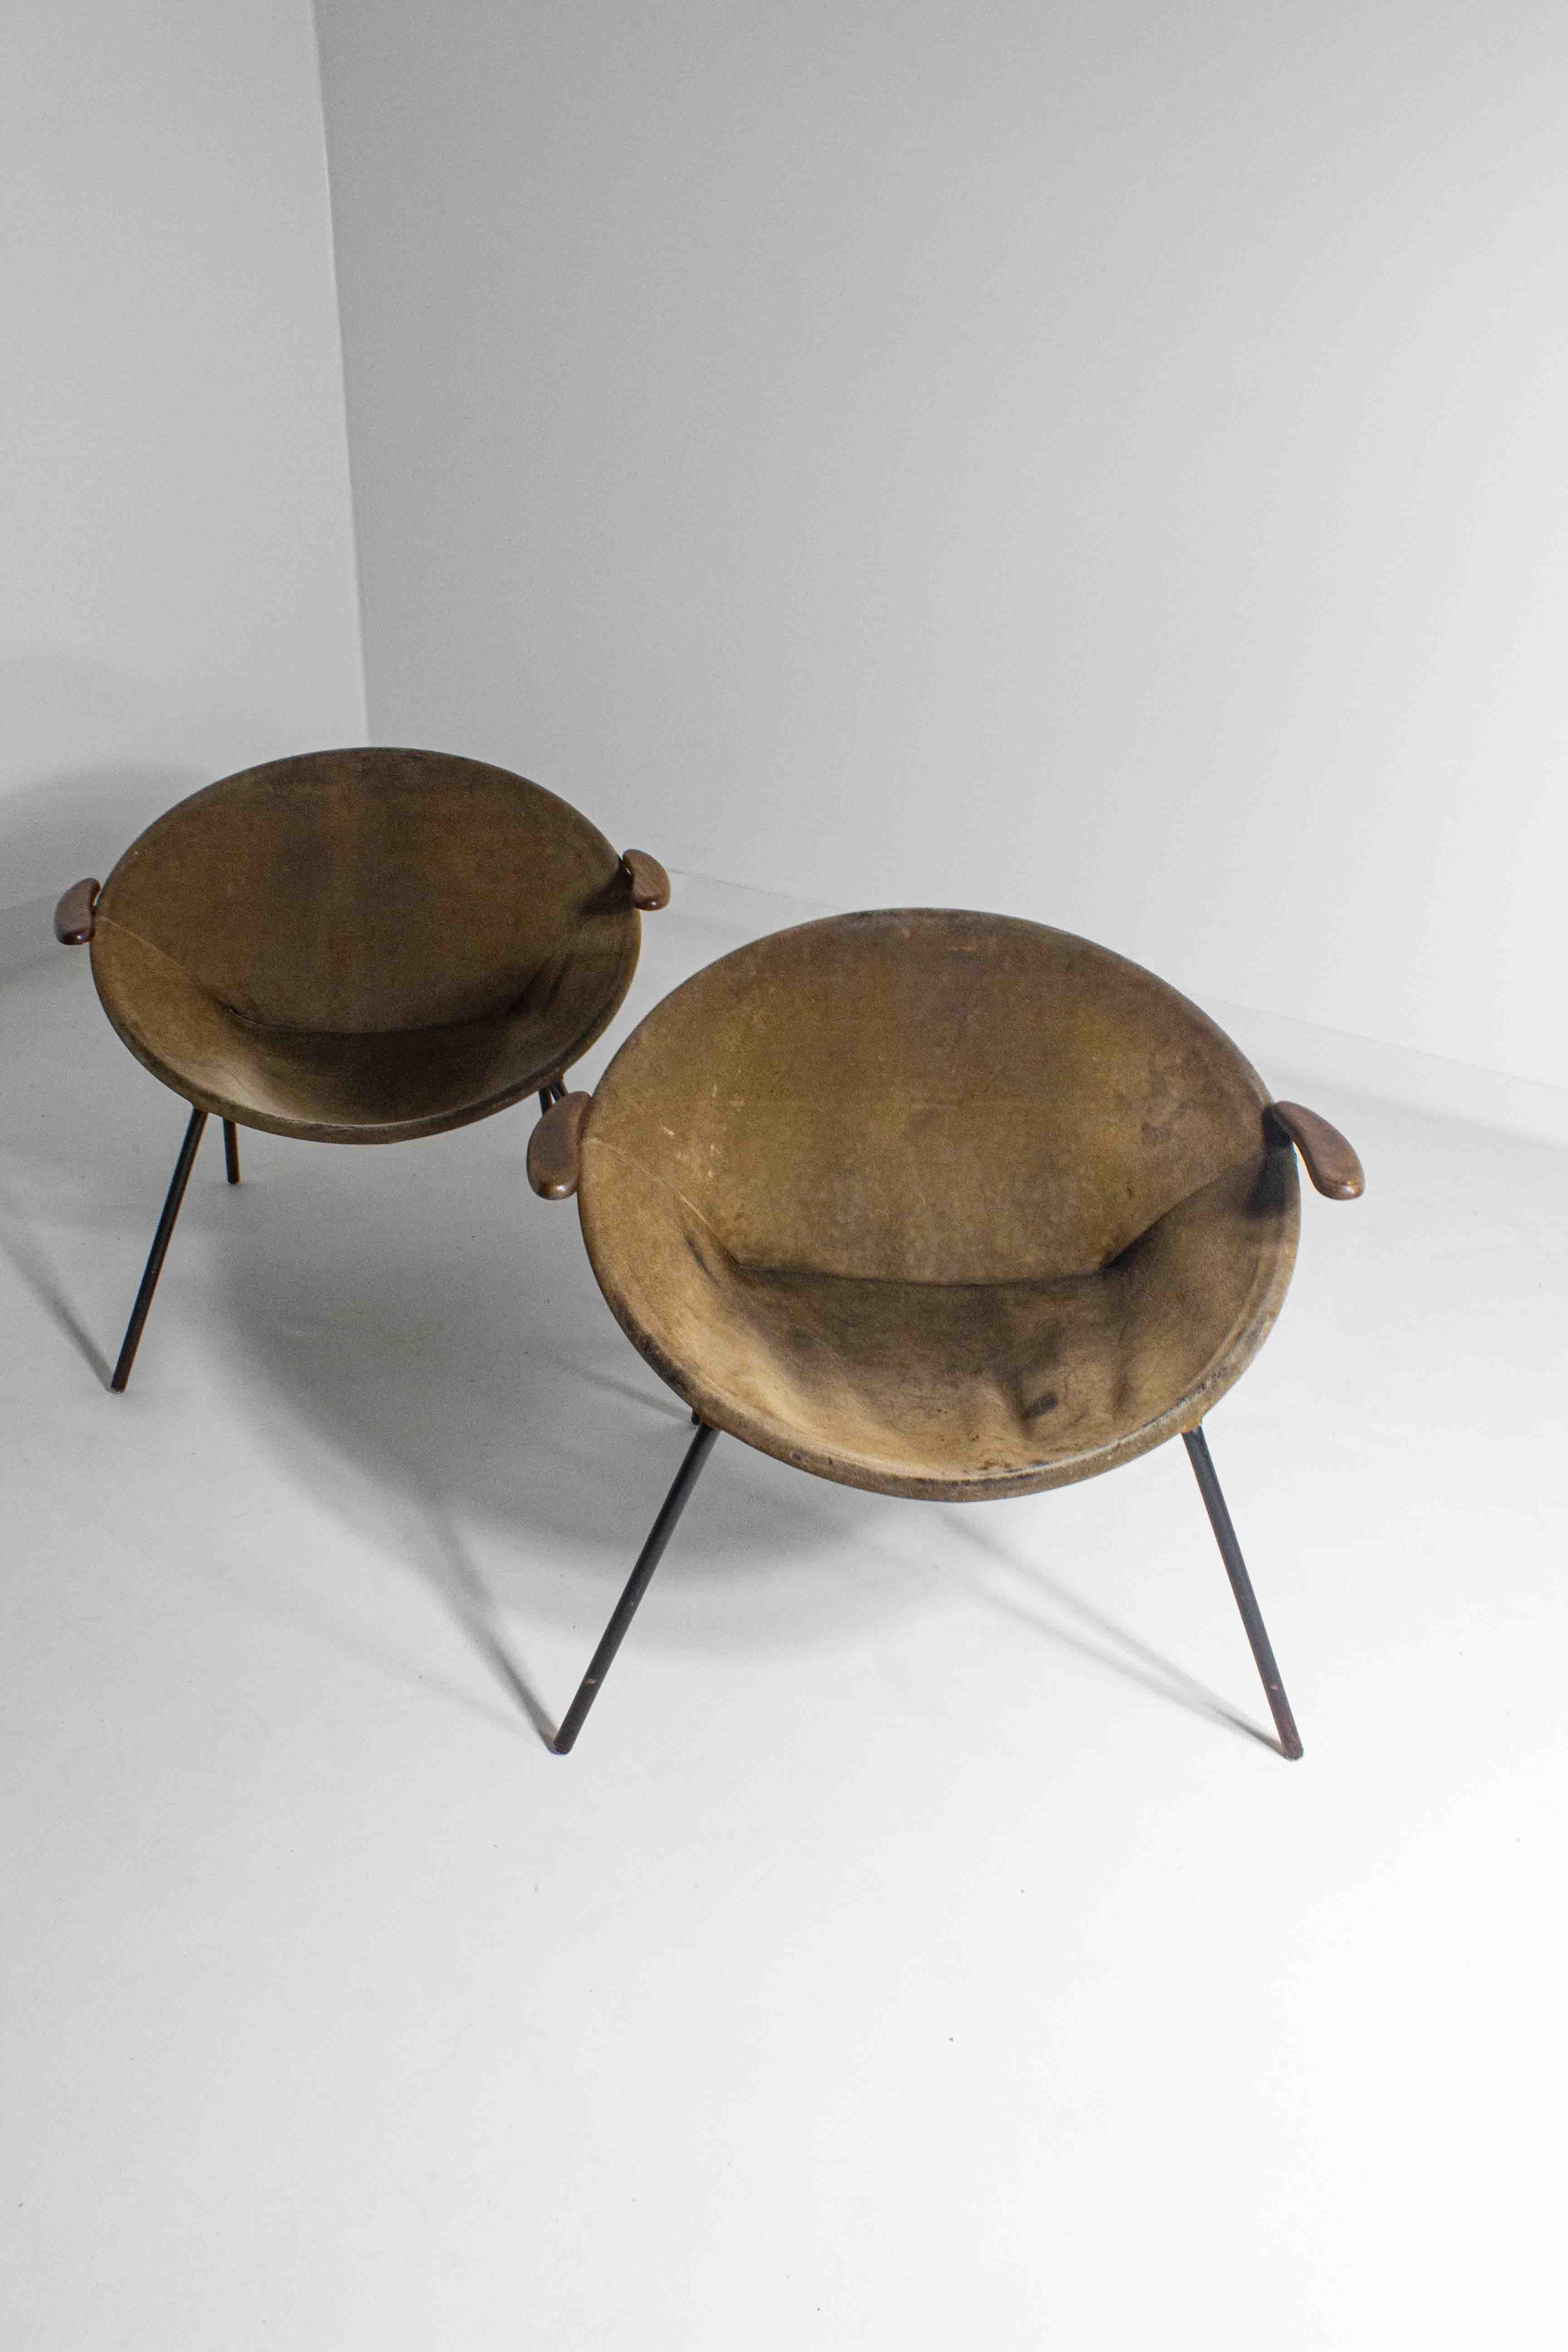 Patinated set of 'Balloon' Chairs by Hans Olsen, Denmark 1950s For Sale 2